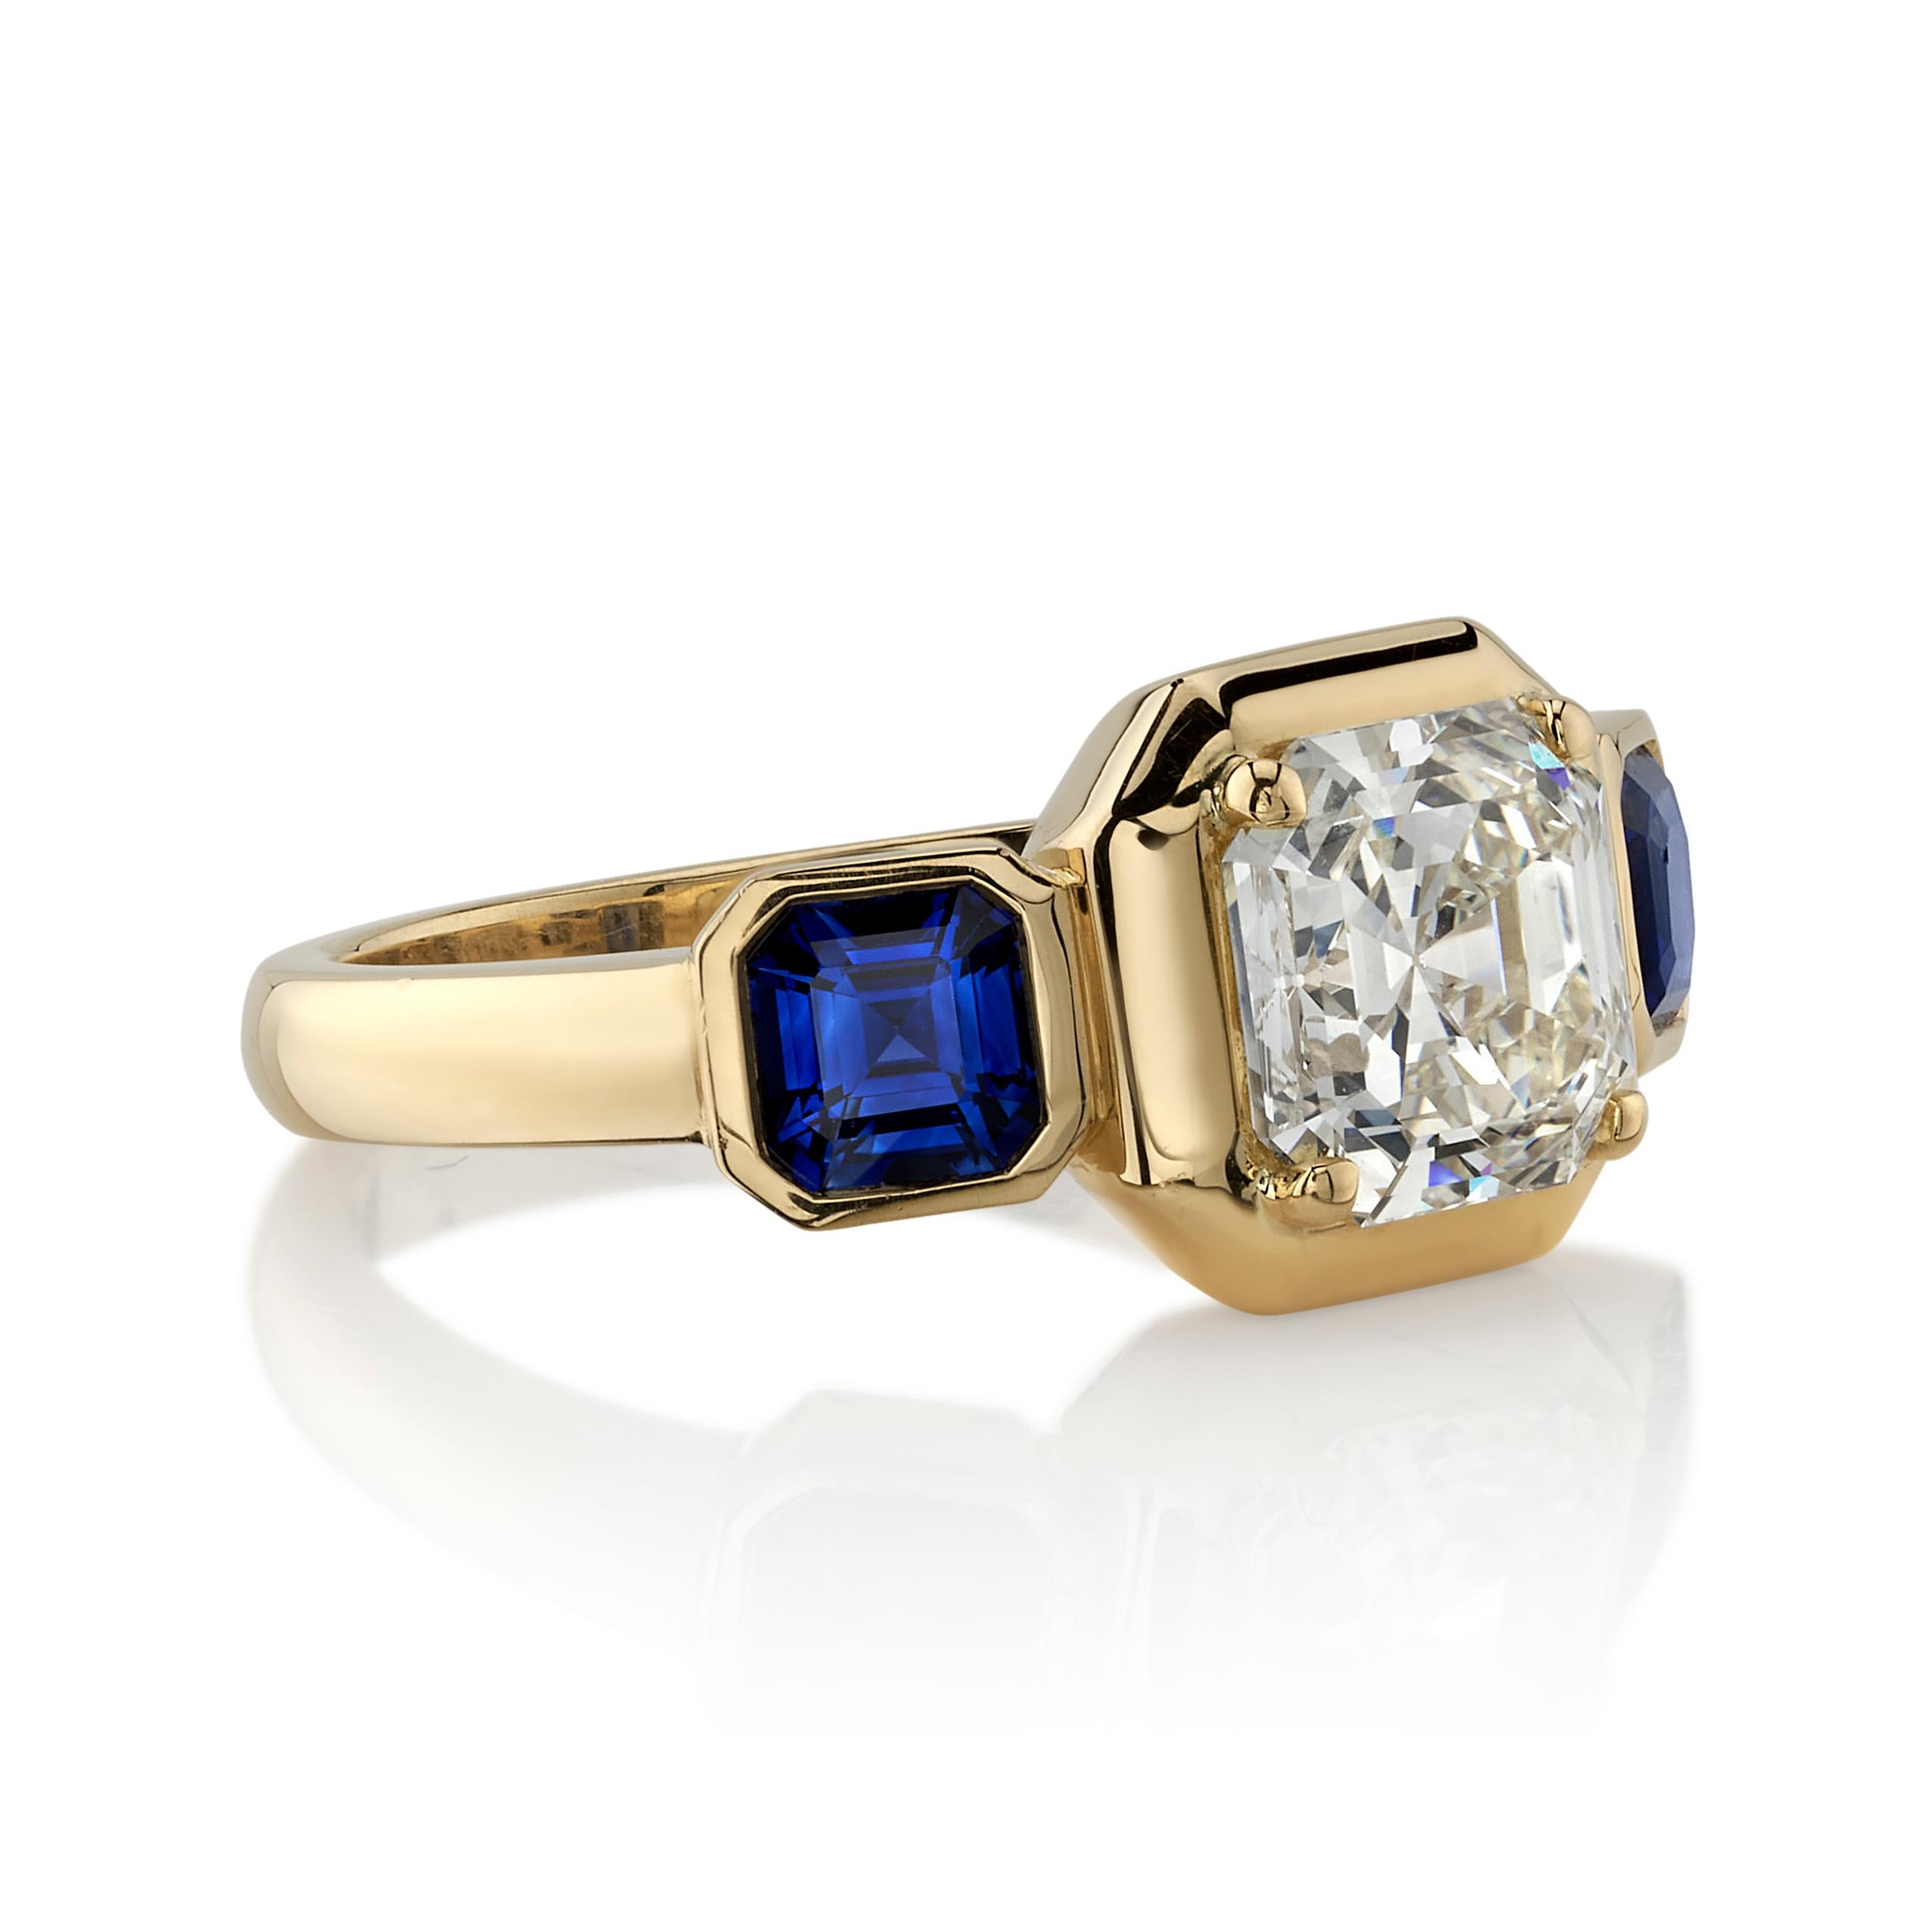 2.05ctw N/VVS2 GIA certified Asscher cut diamond flanked by 1.09ctw blue sapphires set in a handcrafted 18K yellow gold mounting.

Ring is currently a size 6 and can be sized to fit.